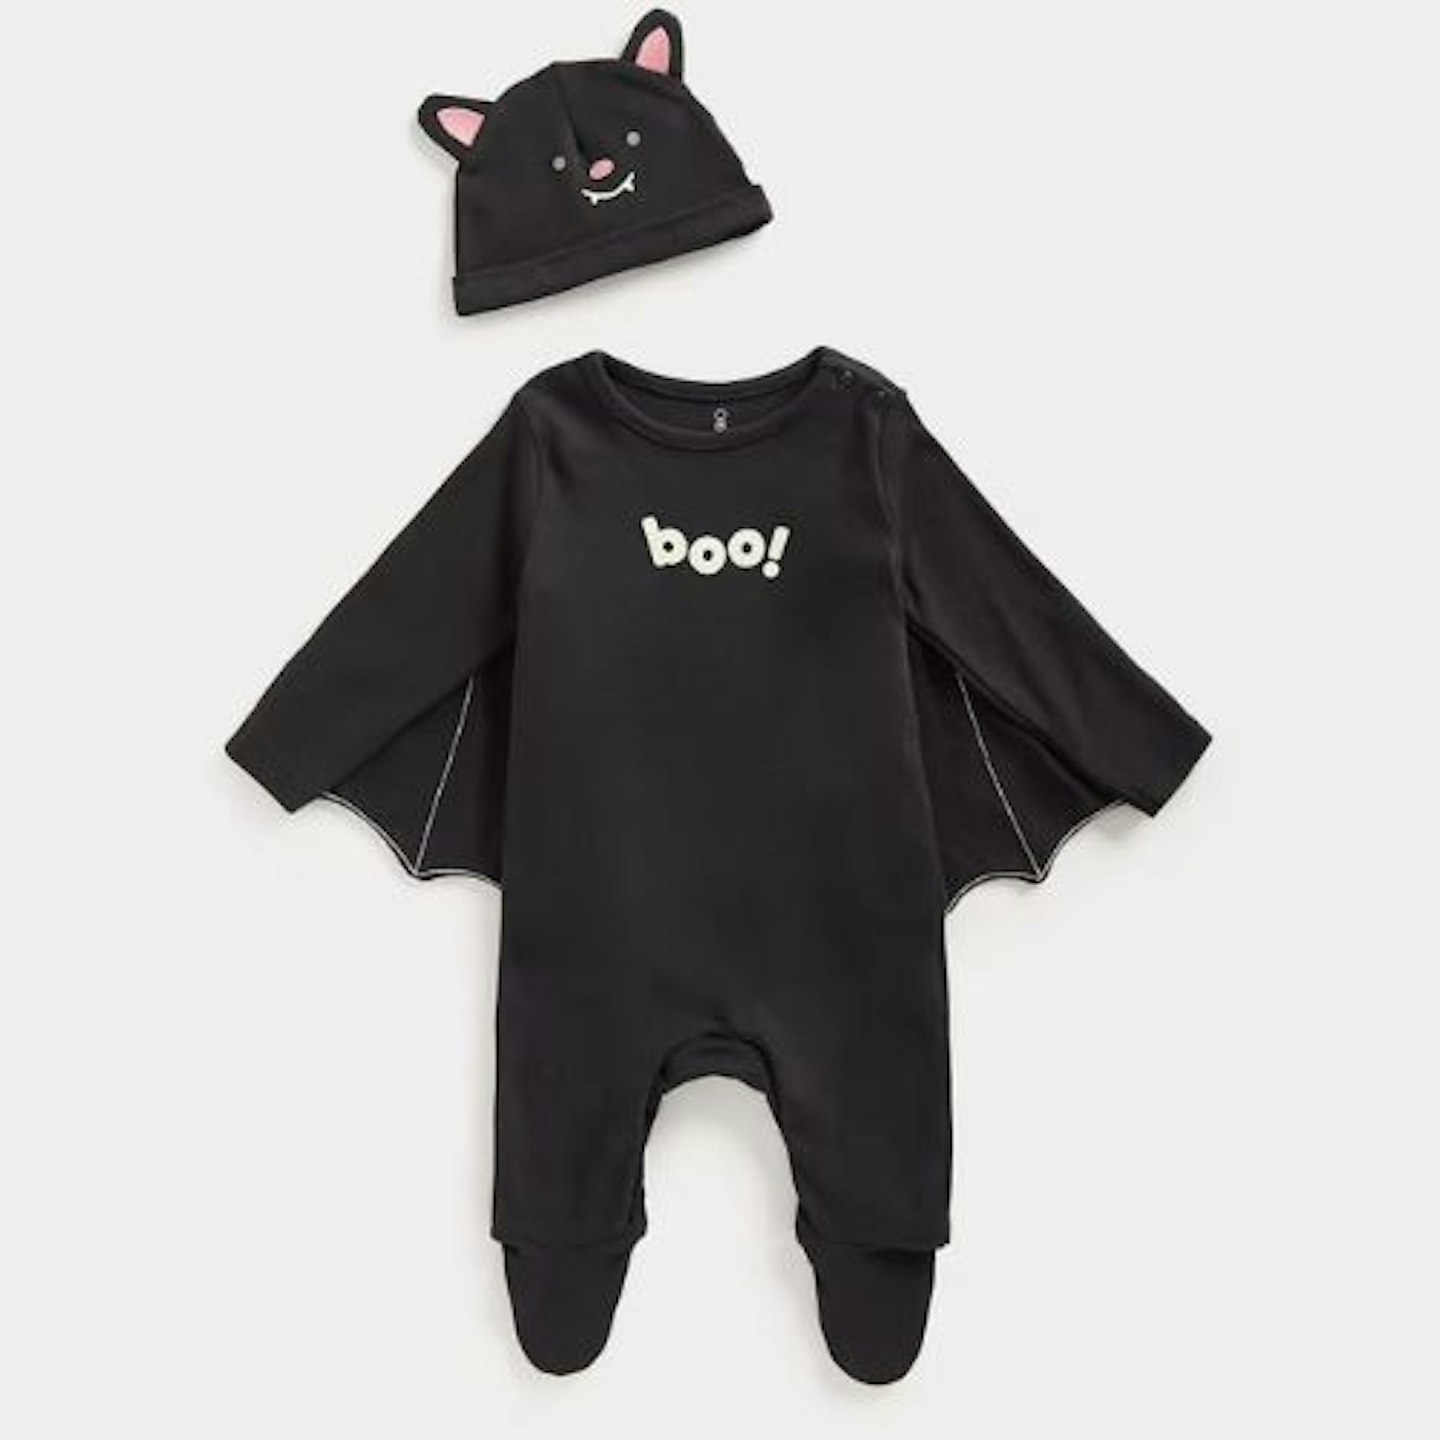 The Best Baby Halloween Costumes: Halloween Bat All-in-One and Hat Set